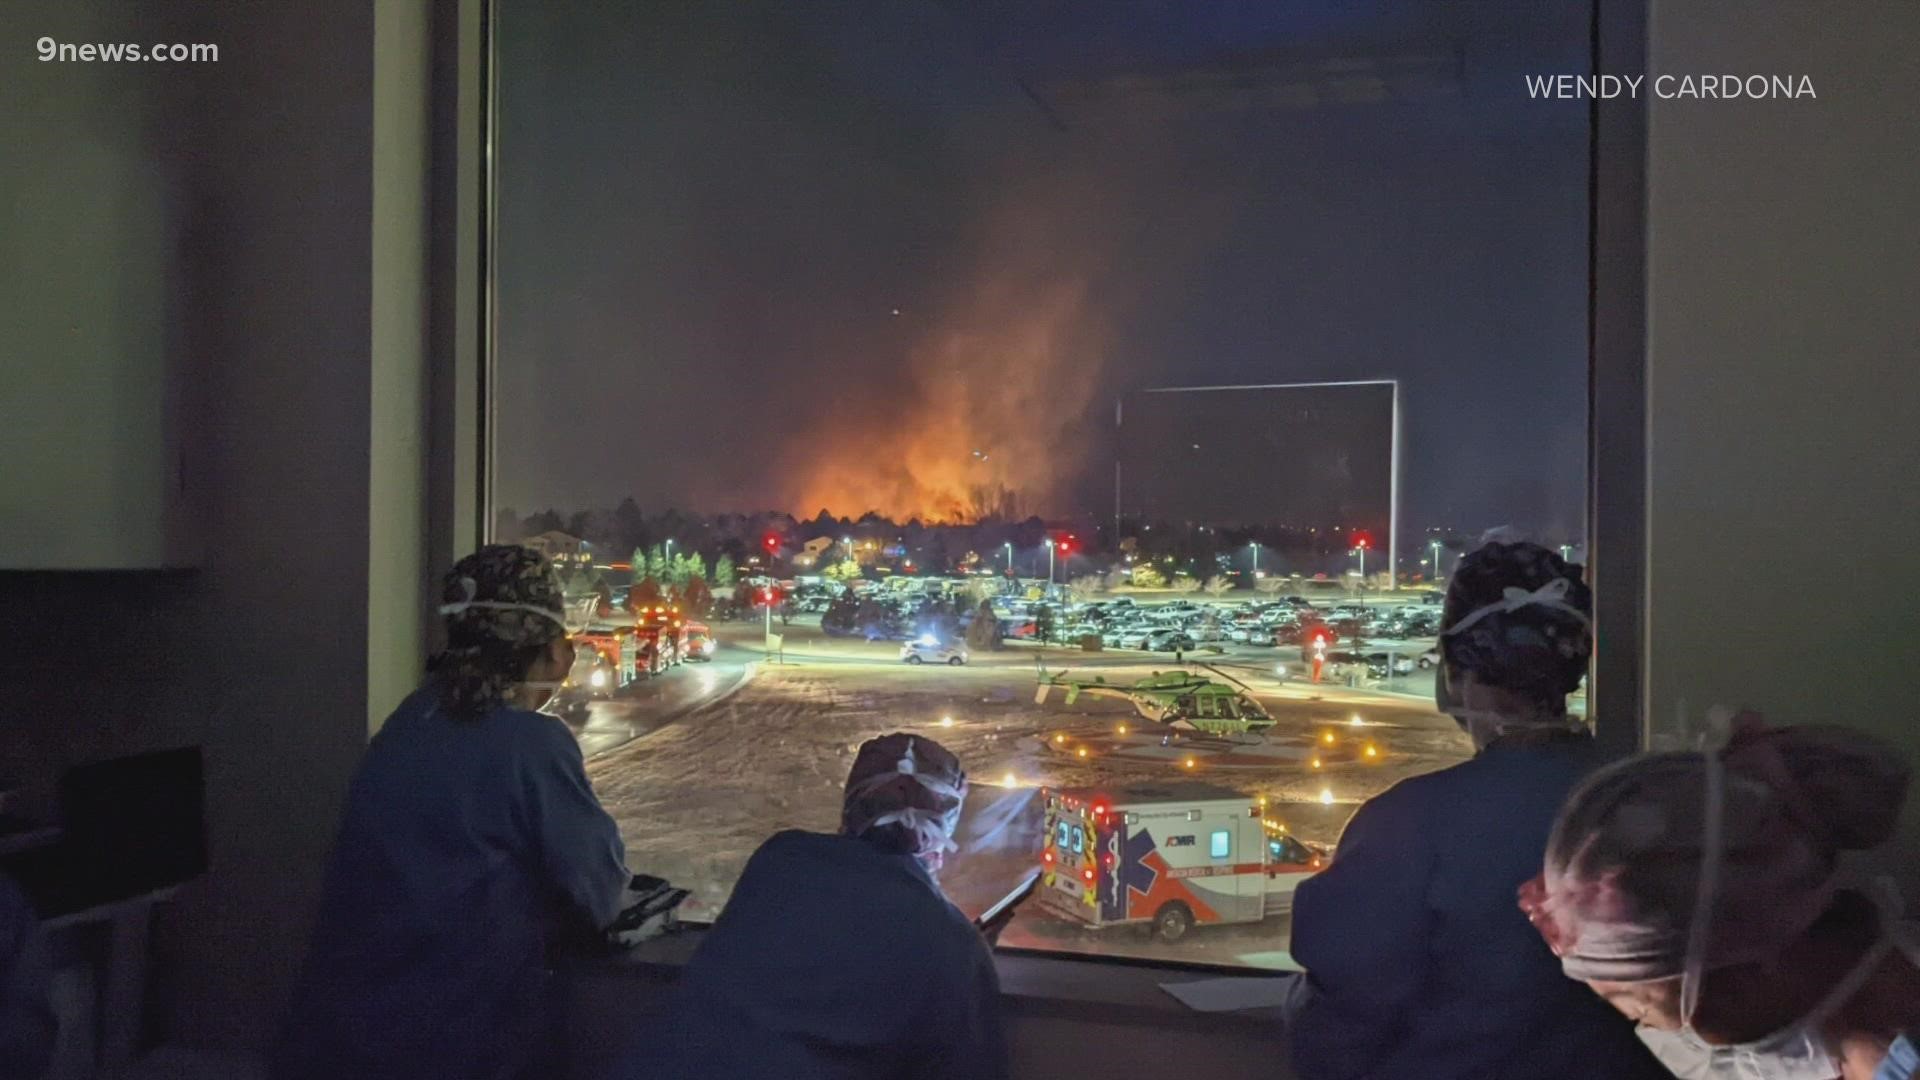 Wendy Cardona's photo, shot using a nighttime mode on her Google Pixel 5 phone, has become one of the most memorable images from Thursday’s Marshall Fire.